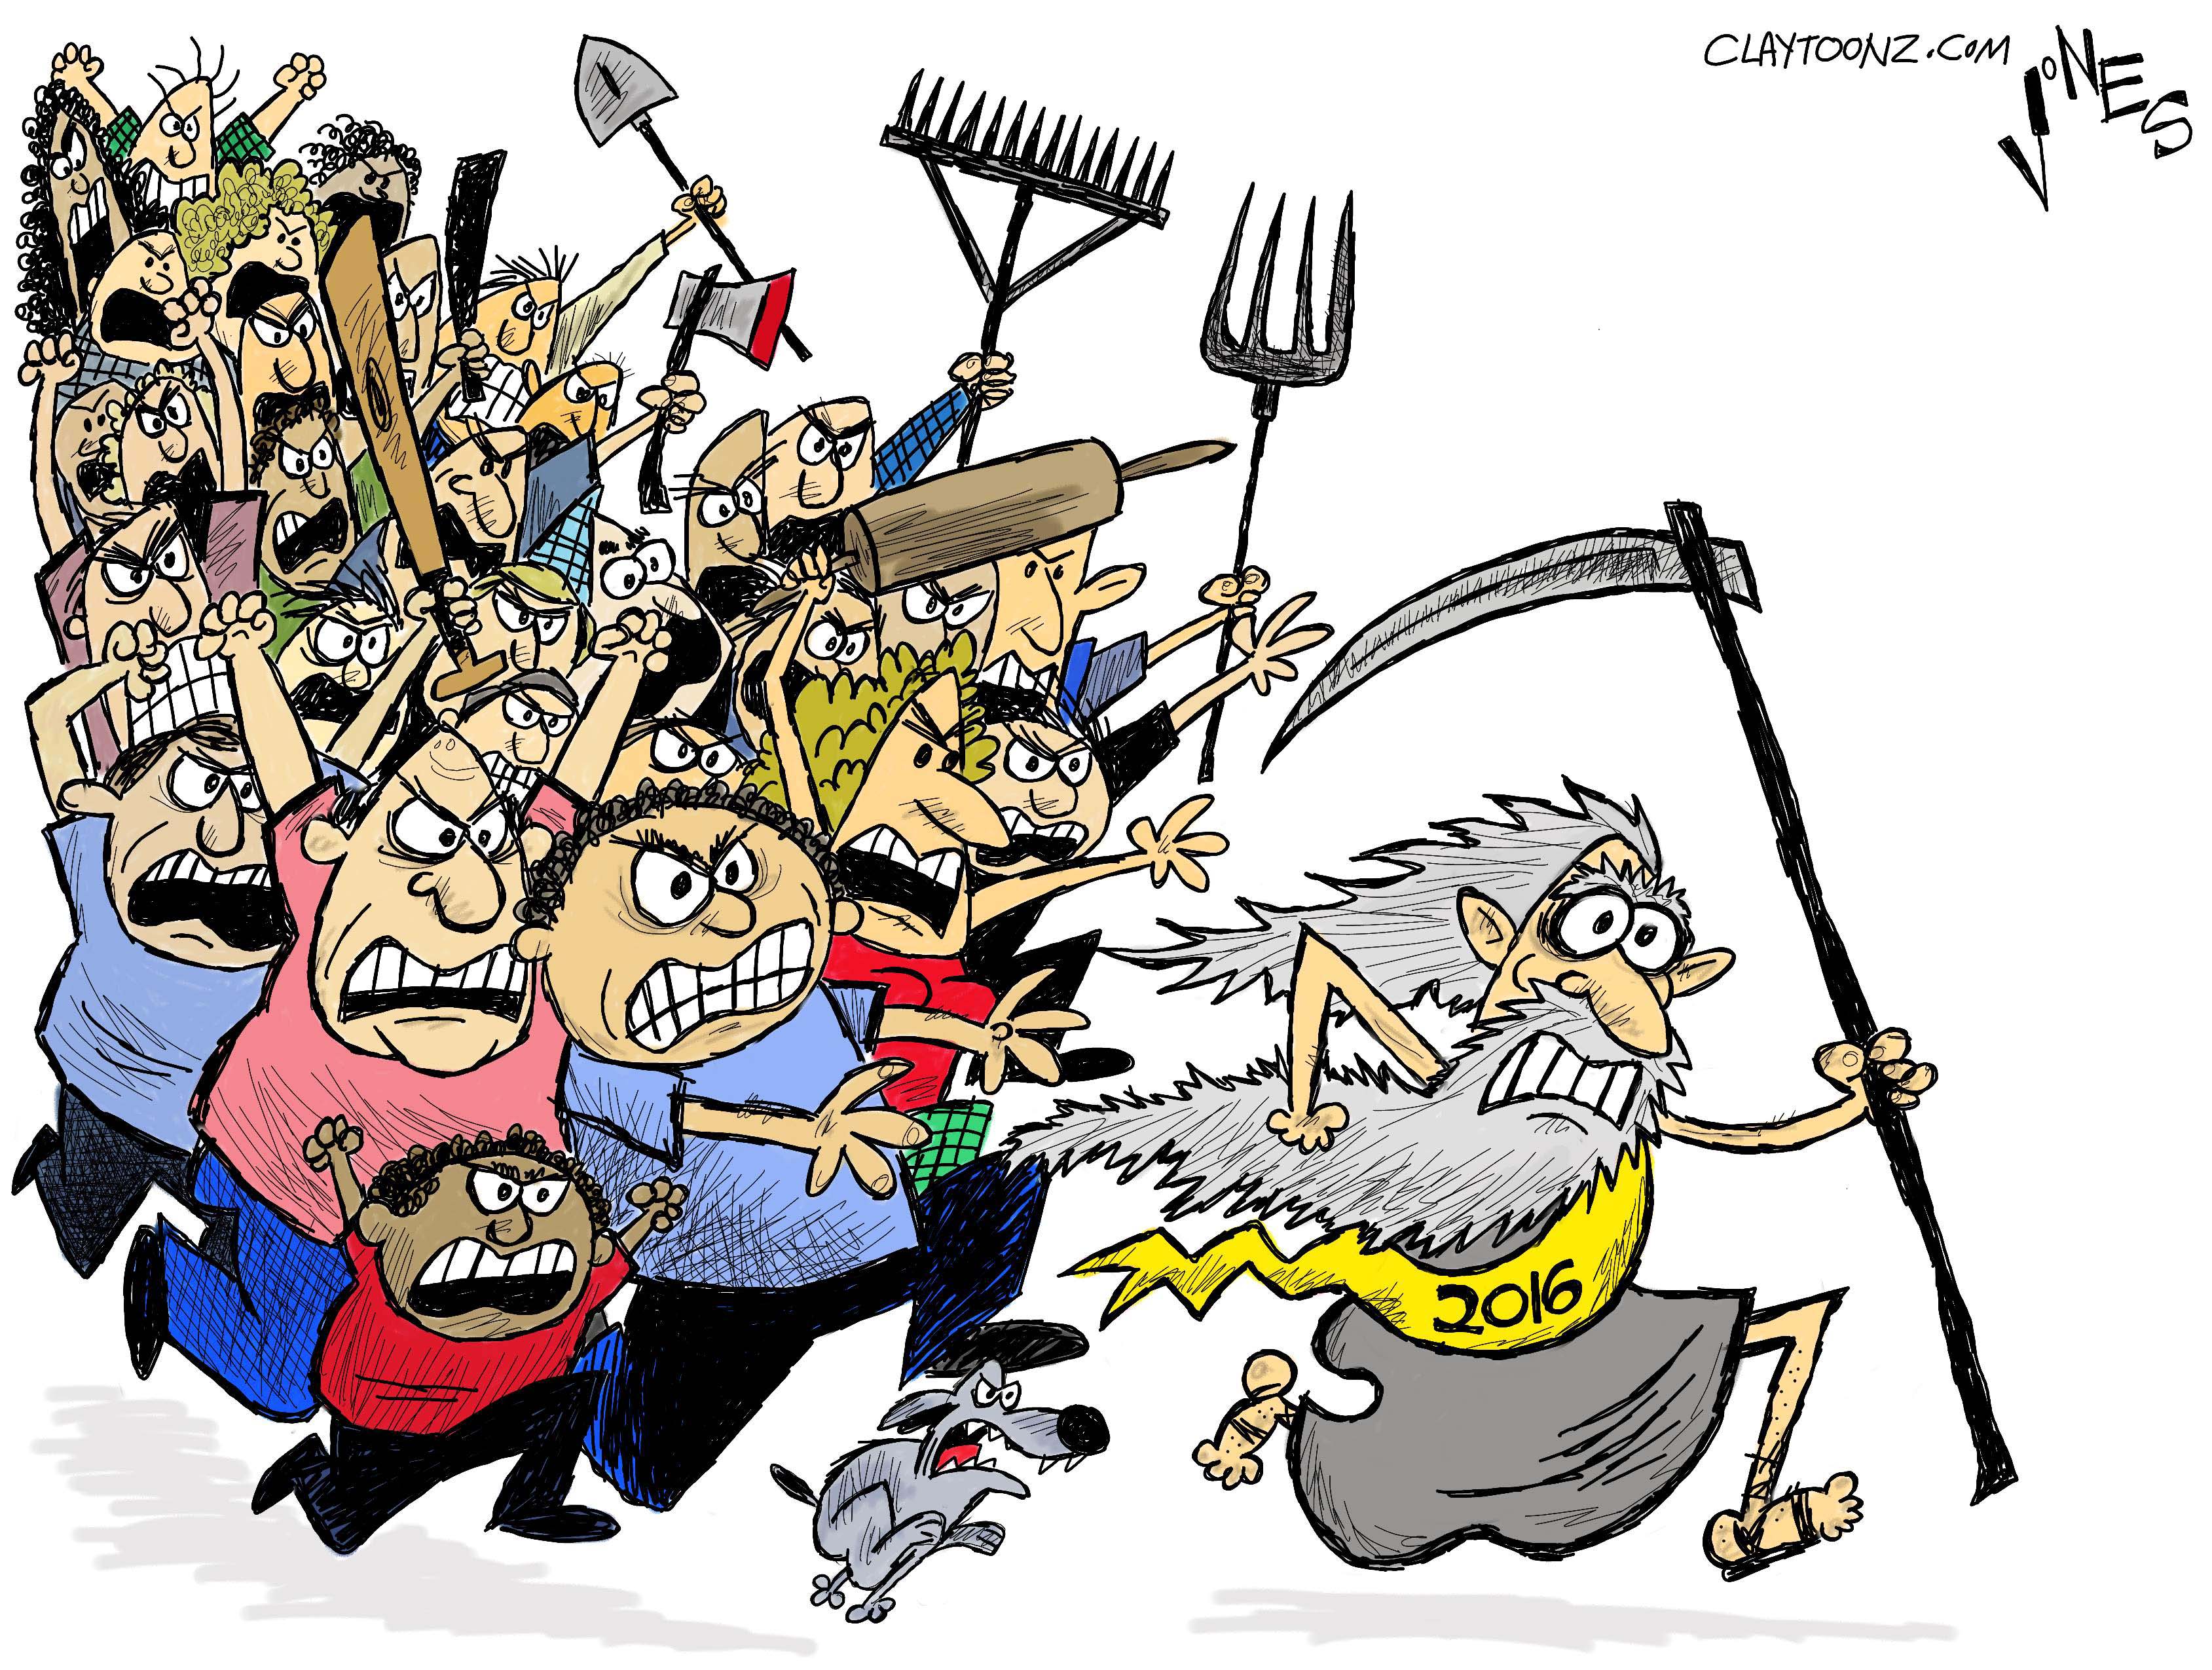 Editorial cartoon . New Years Eve 2016 angry people